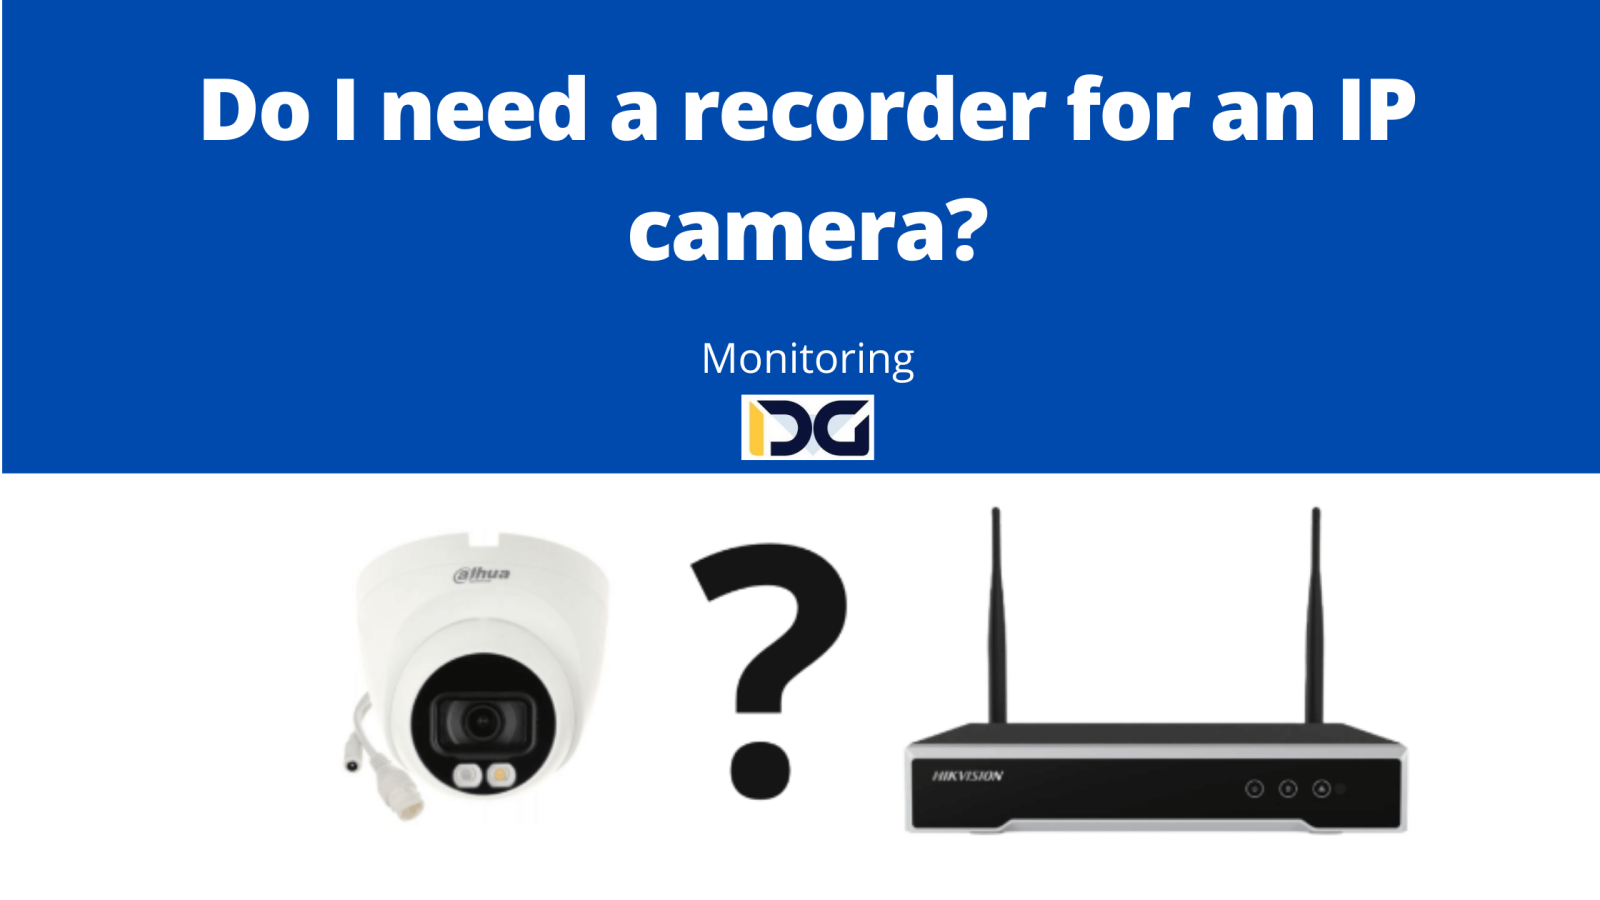 Do I need a recorder for an IP camera?